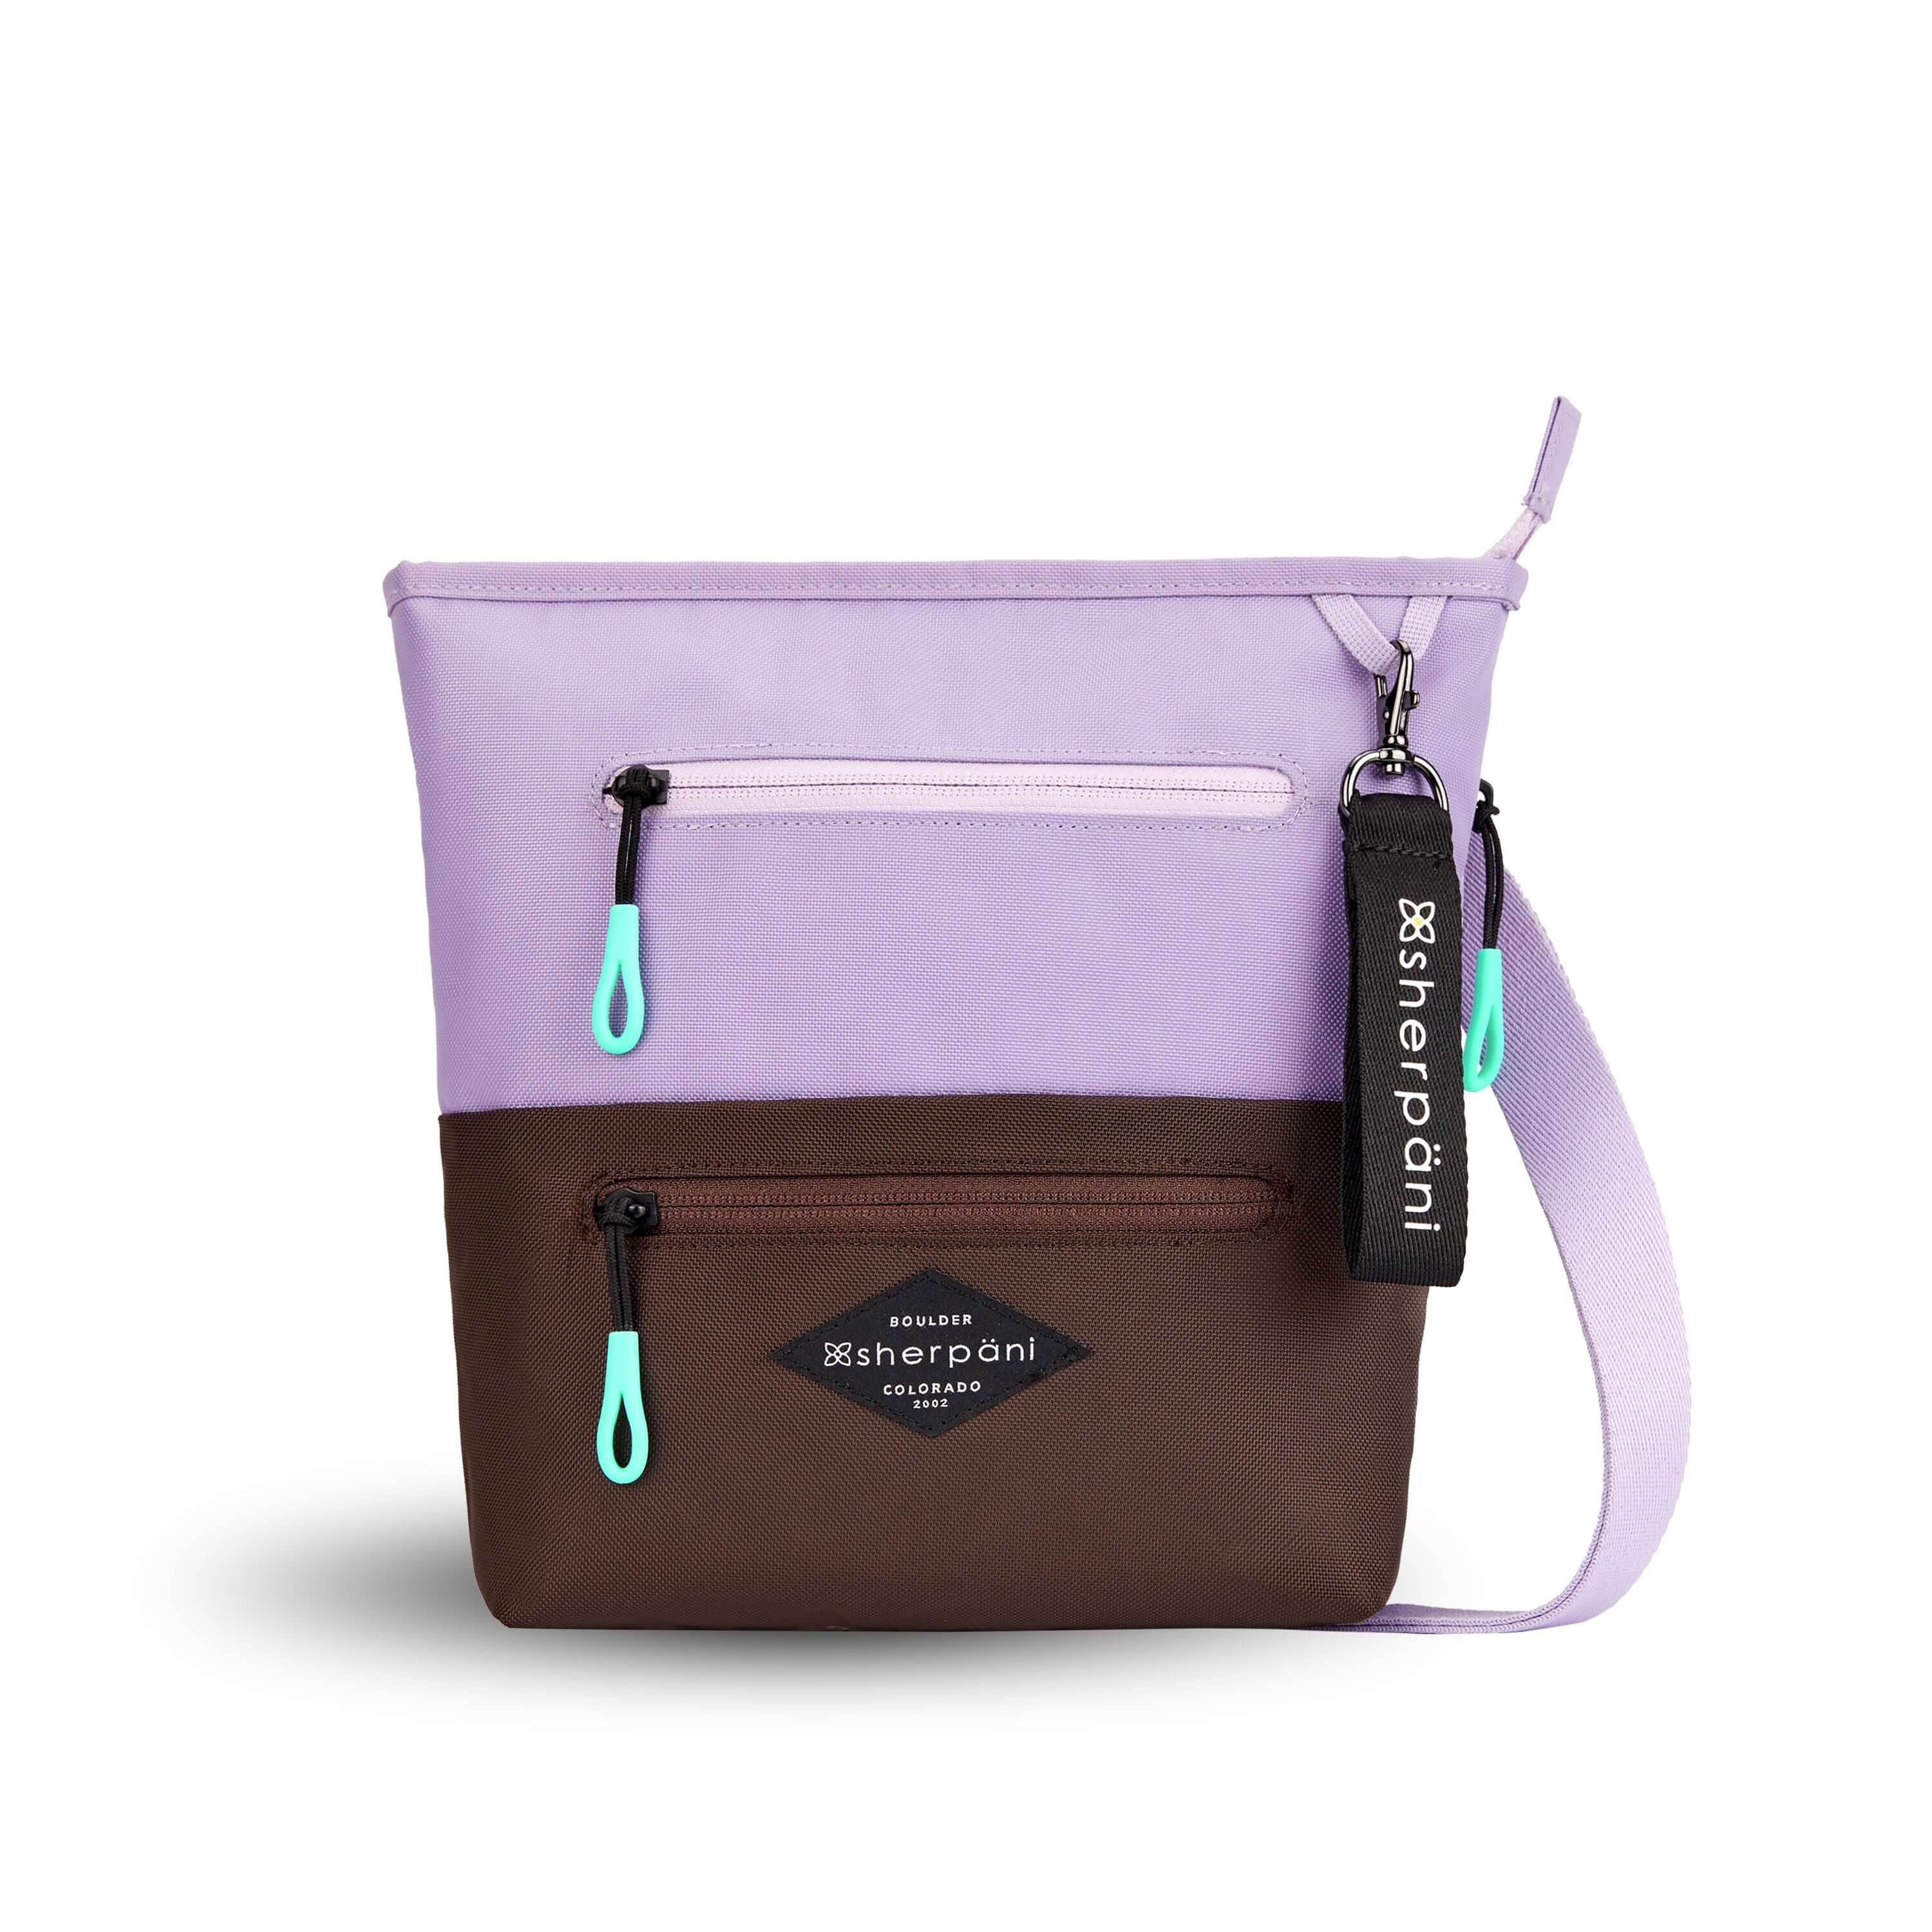 Flat front view of Sherpani’s crossbody, the Sadie, in Lavender. The top half of the bag is lavender and the bottom half of the bag is brown. It features two exterior zipper pockets on the front panel with easy-pull zippers accented in aqua. A Sherpani branded keychain is attached to a fabric loop in the upper right corner. It has an adjustable crossbody strap.